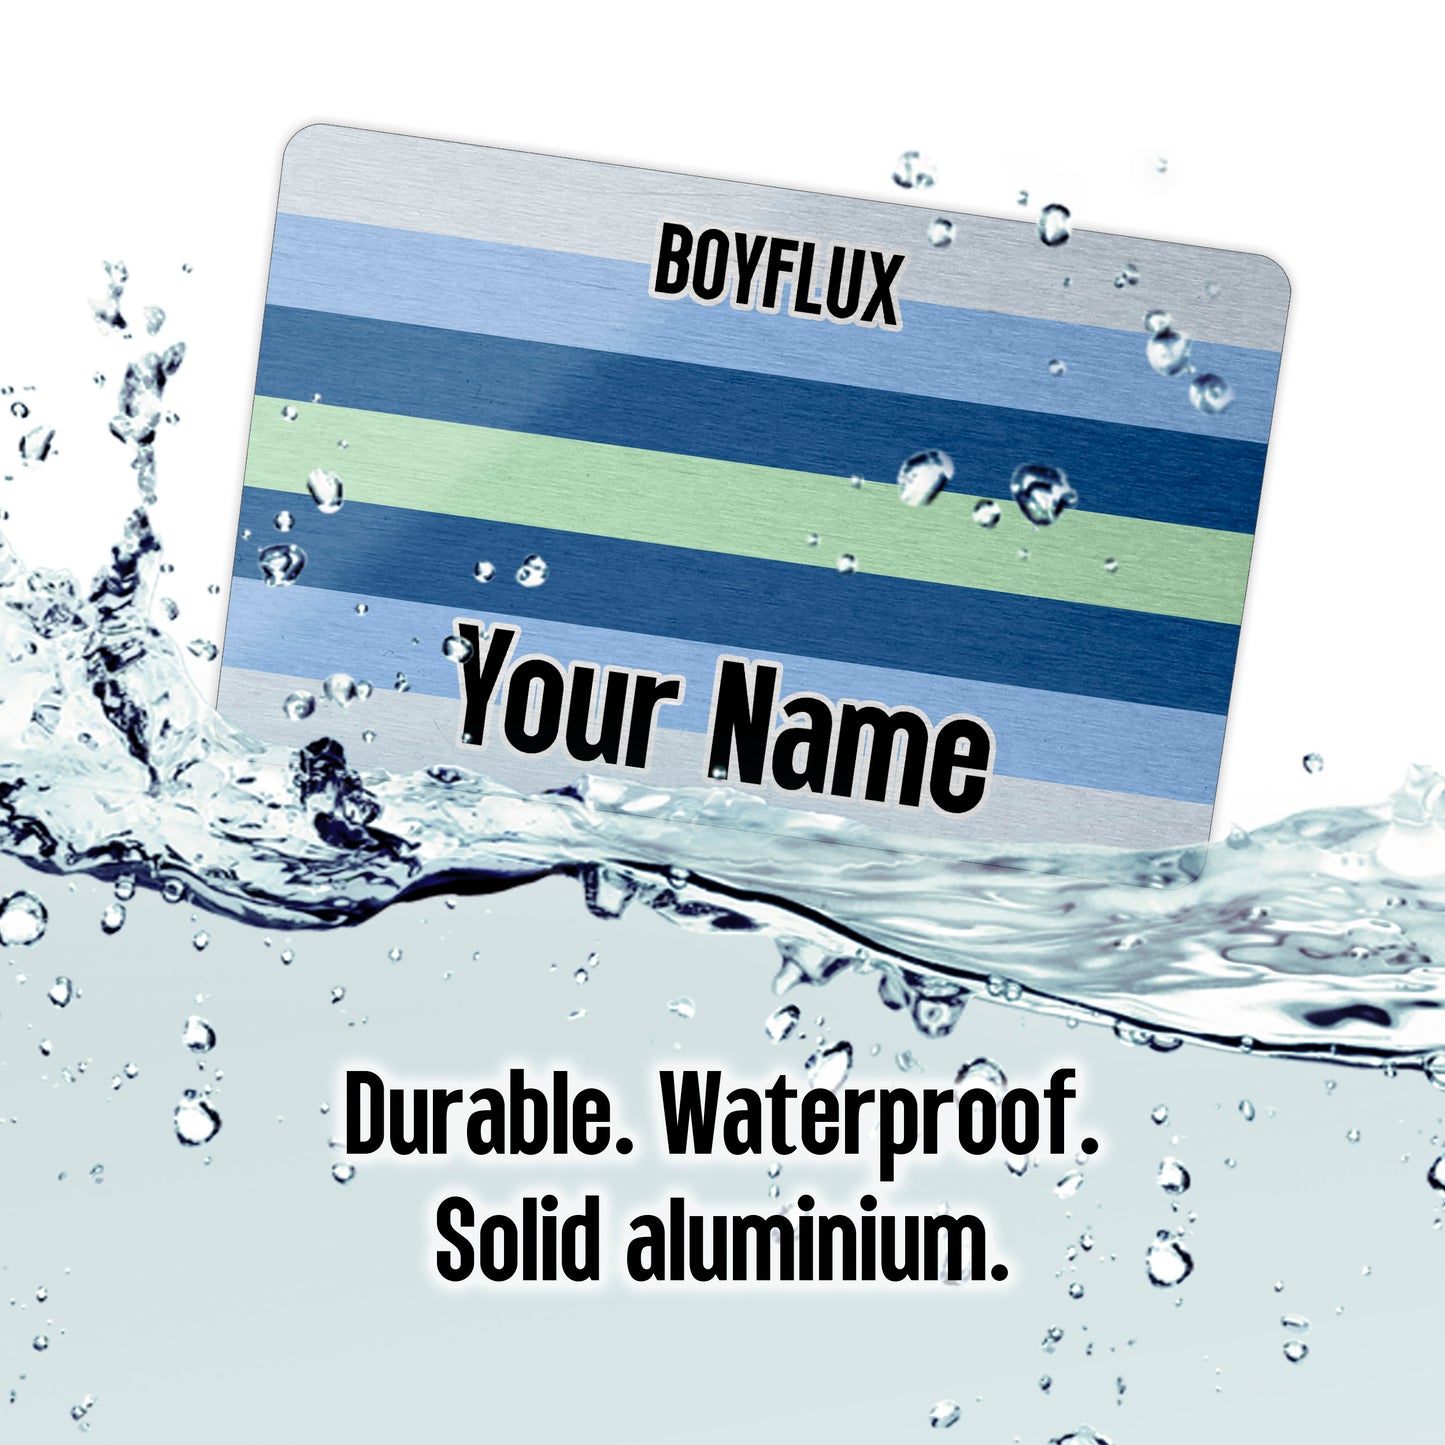 Aluminium wallet card personalised with your name and the boyflux pride flag